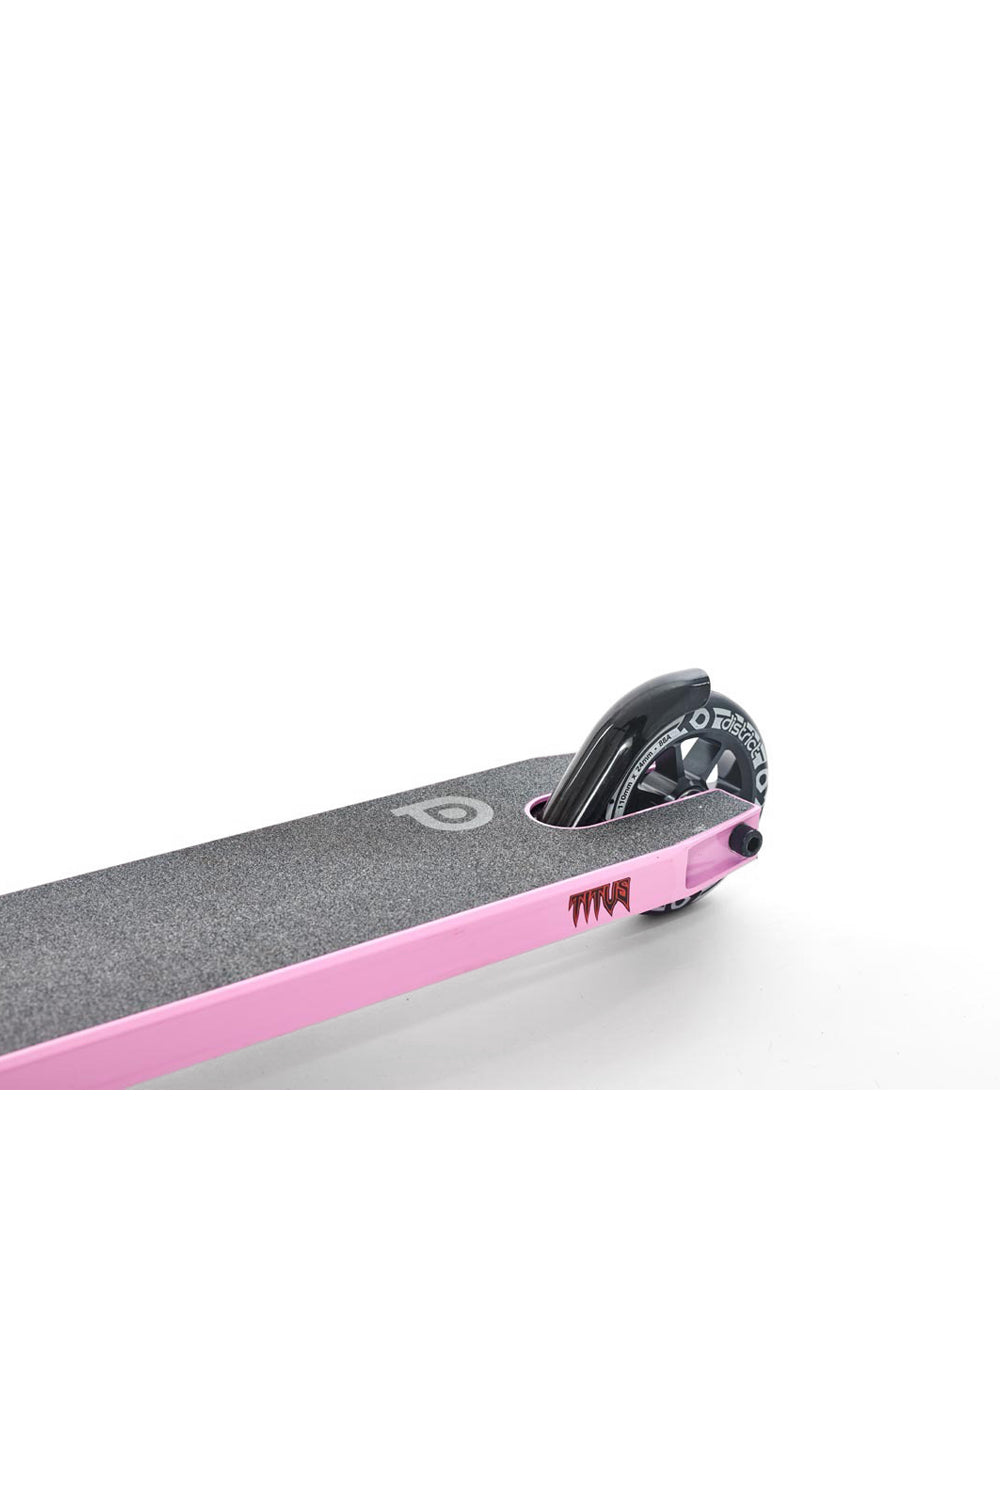 District Titus Complete - Powder Pink / Black - 110mm Wheels Scooter